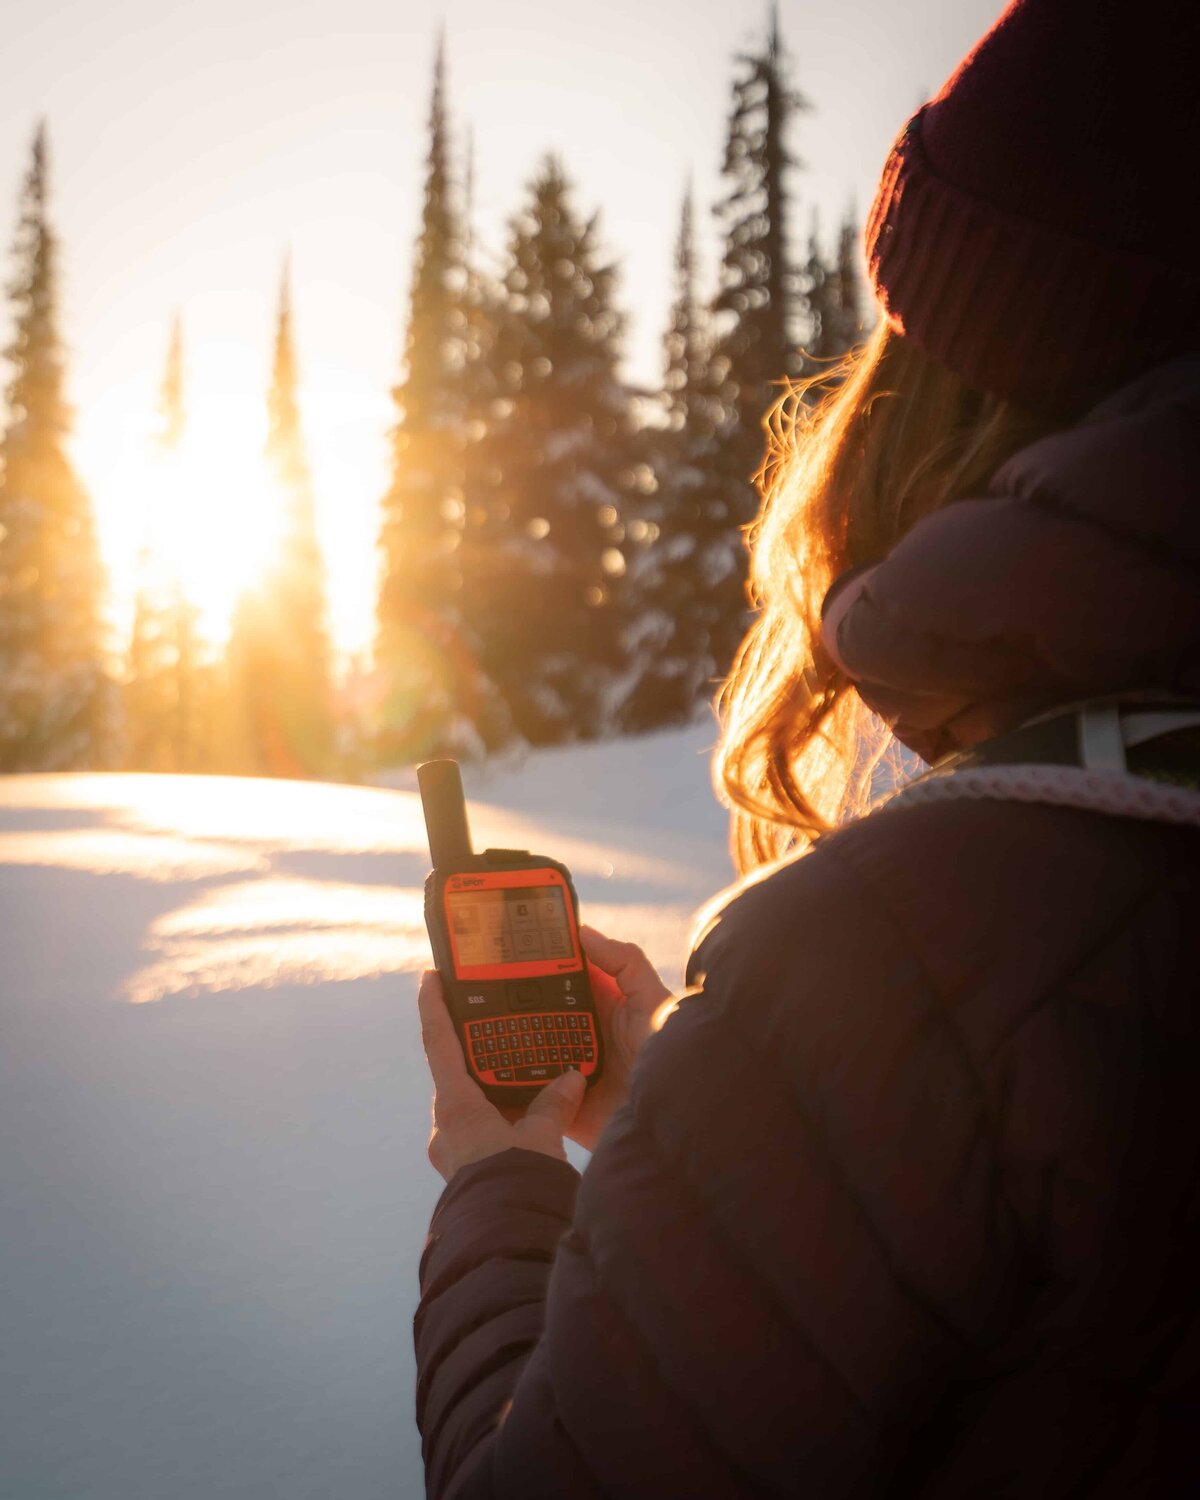 Woman holding an orange SPOT GPS in the snow